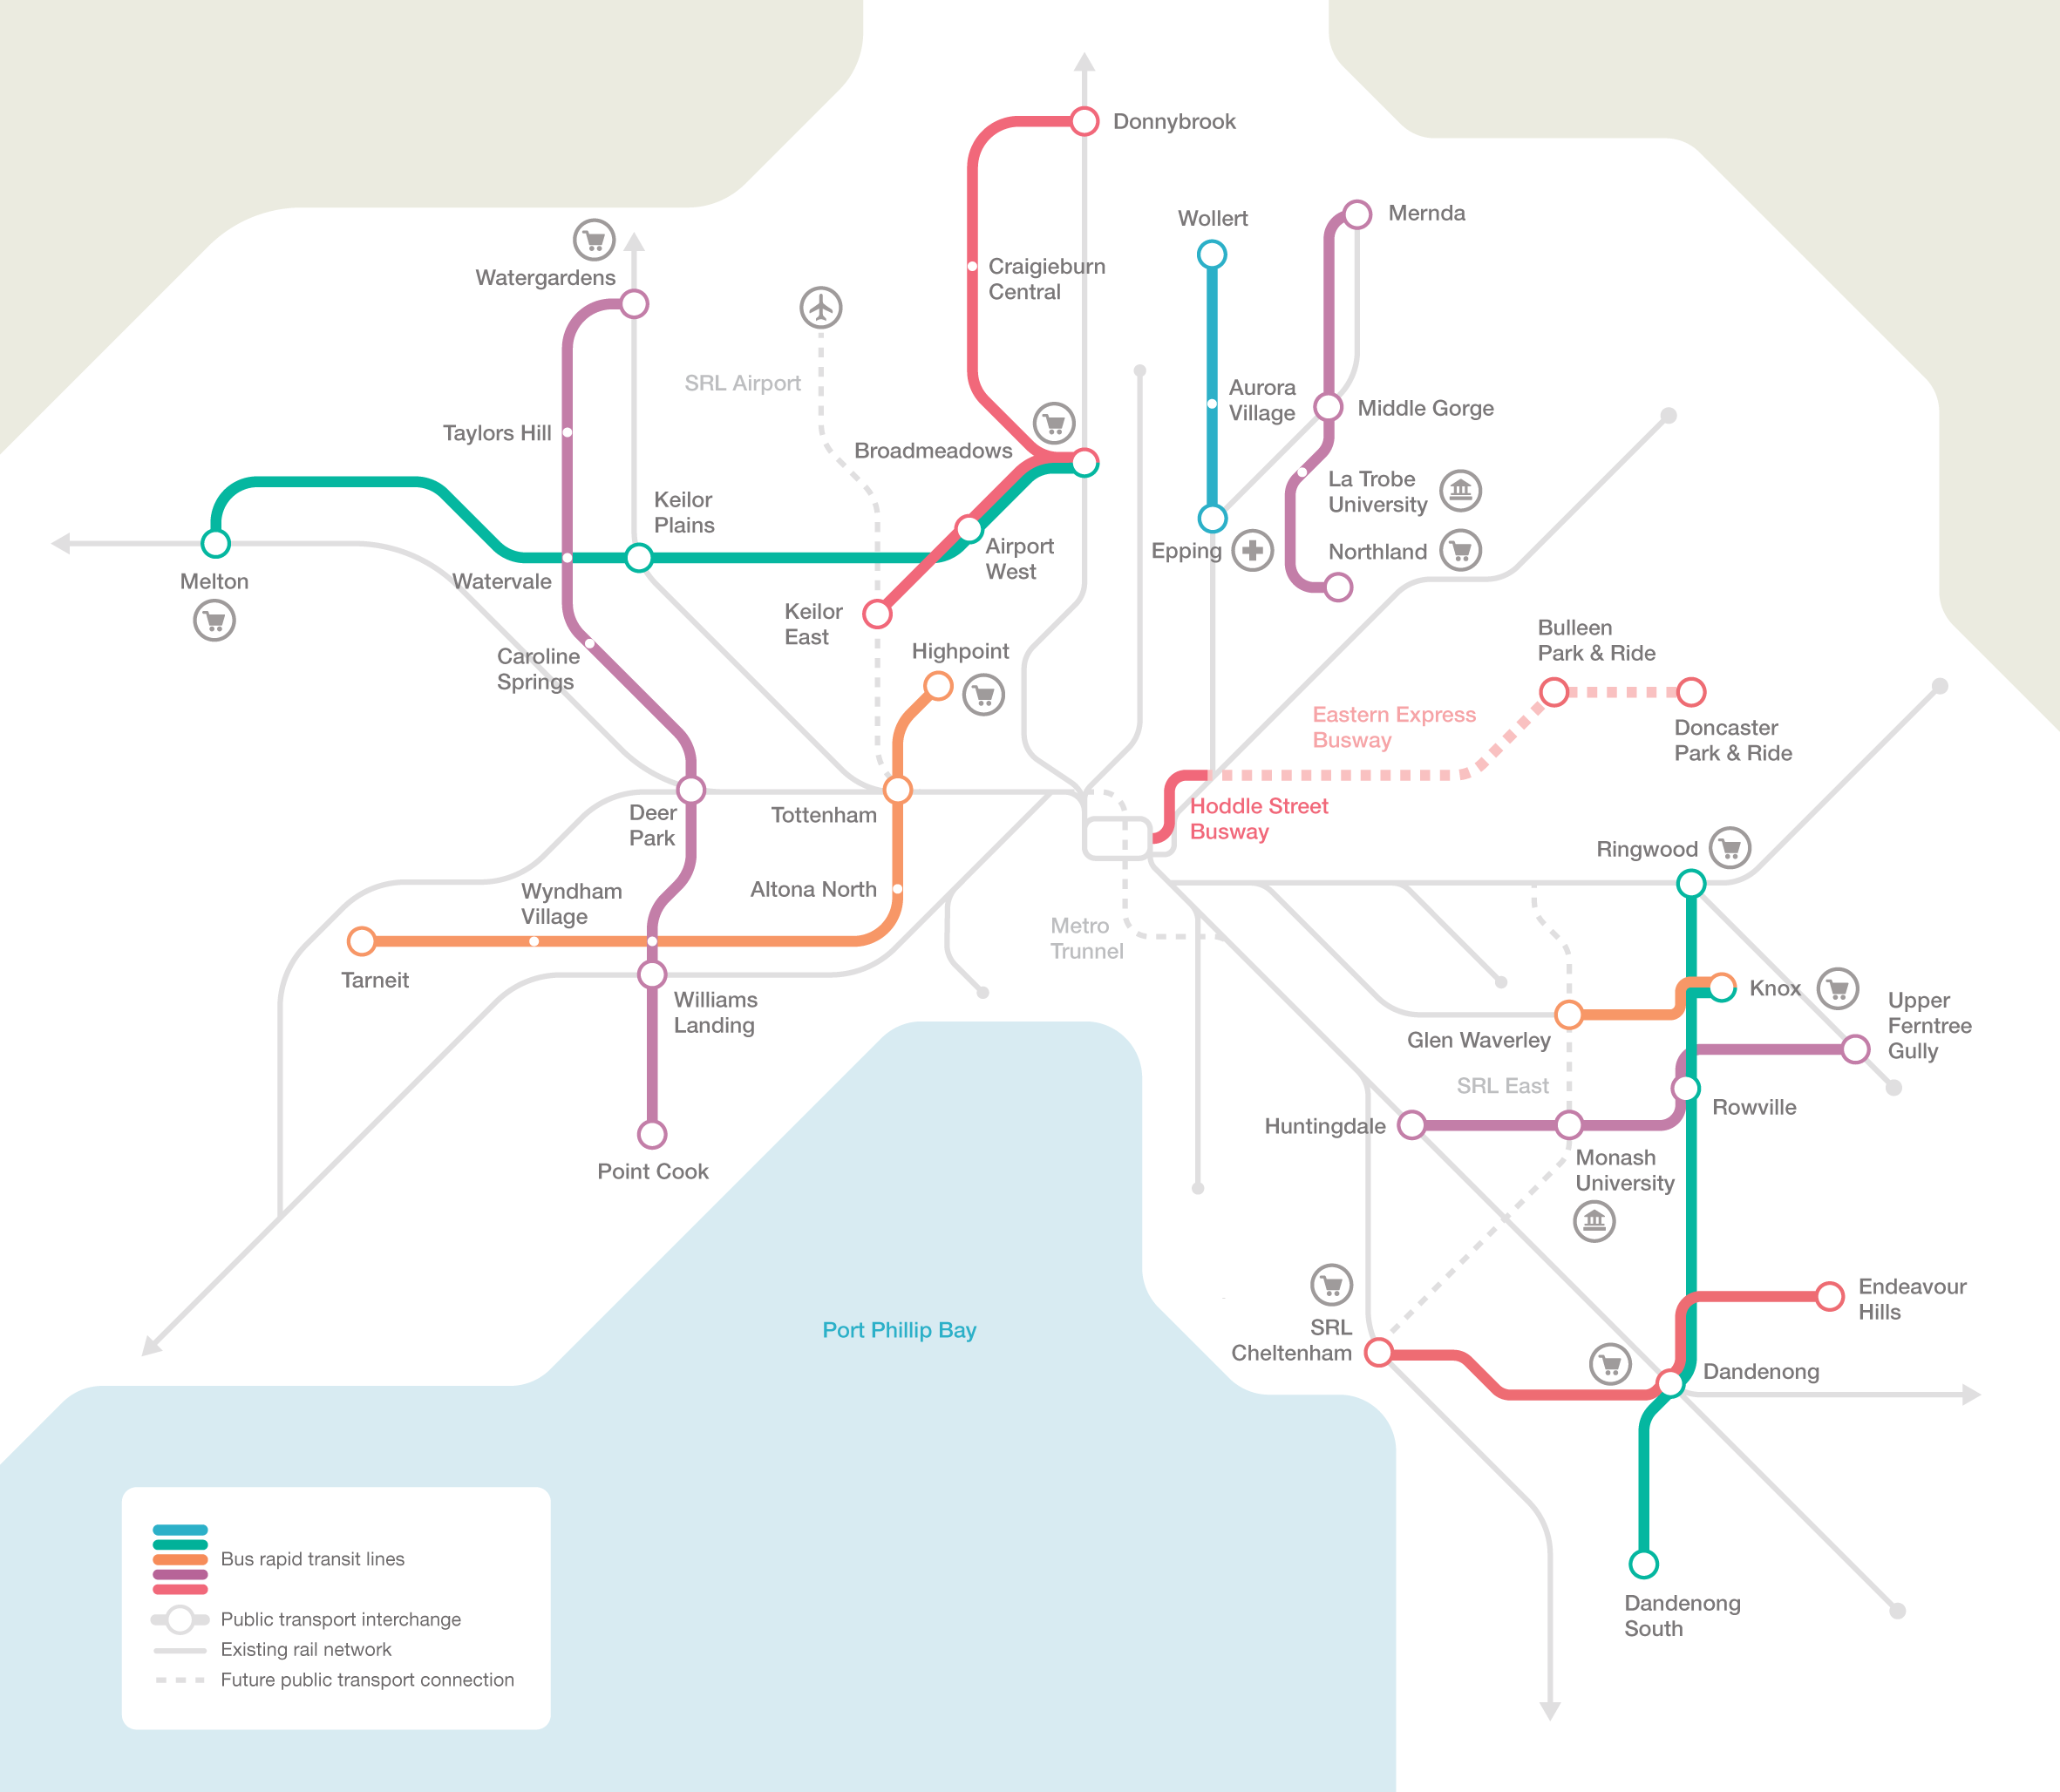 A map of the recommended network of rapid bus transit routes.